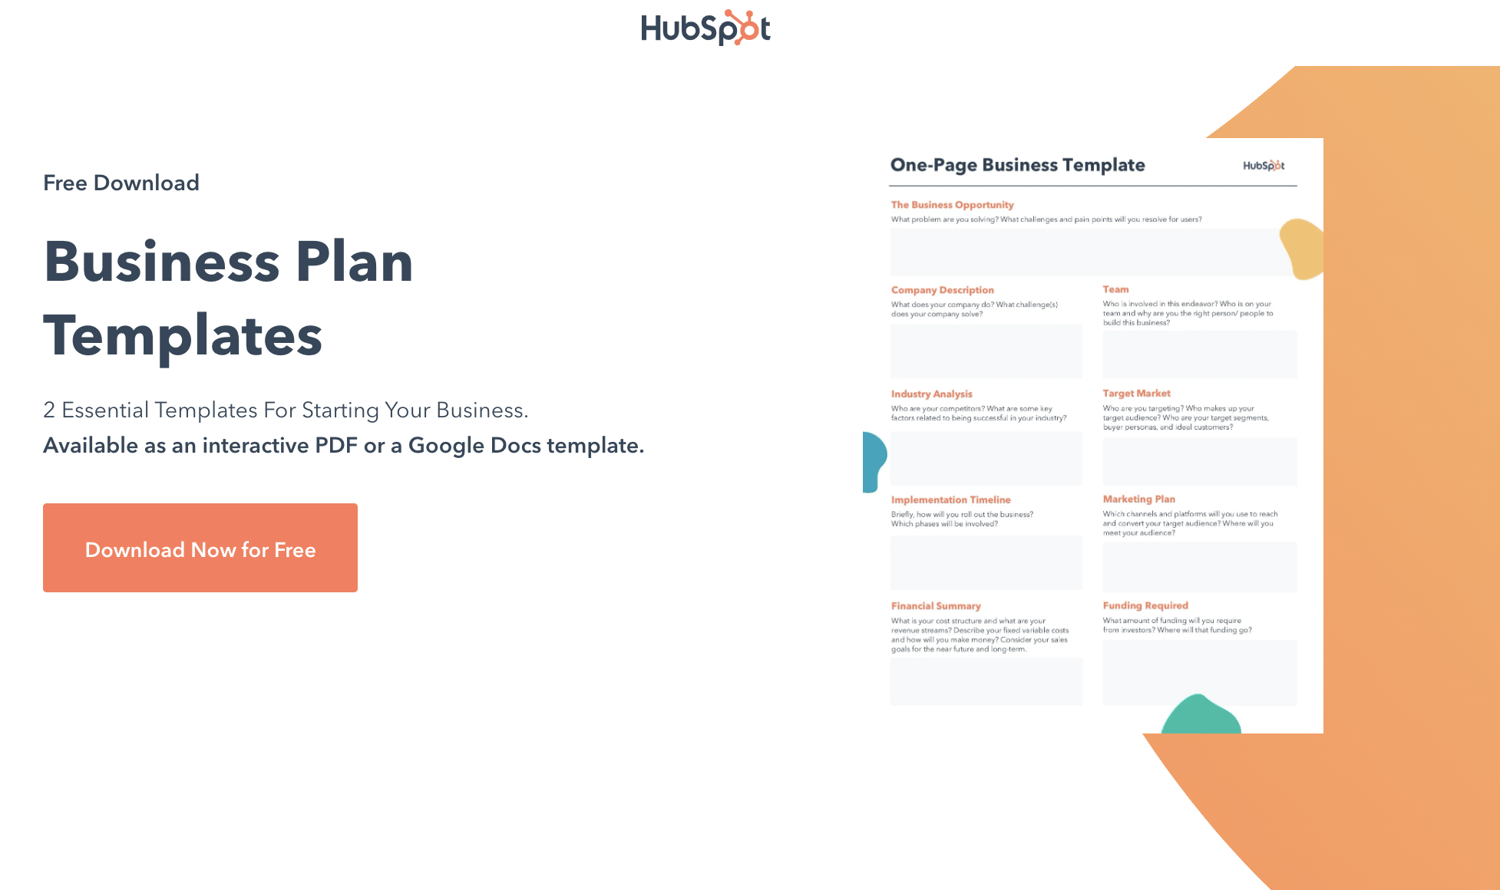 25 Great Business Plan Powerpoint Templates 2019